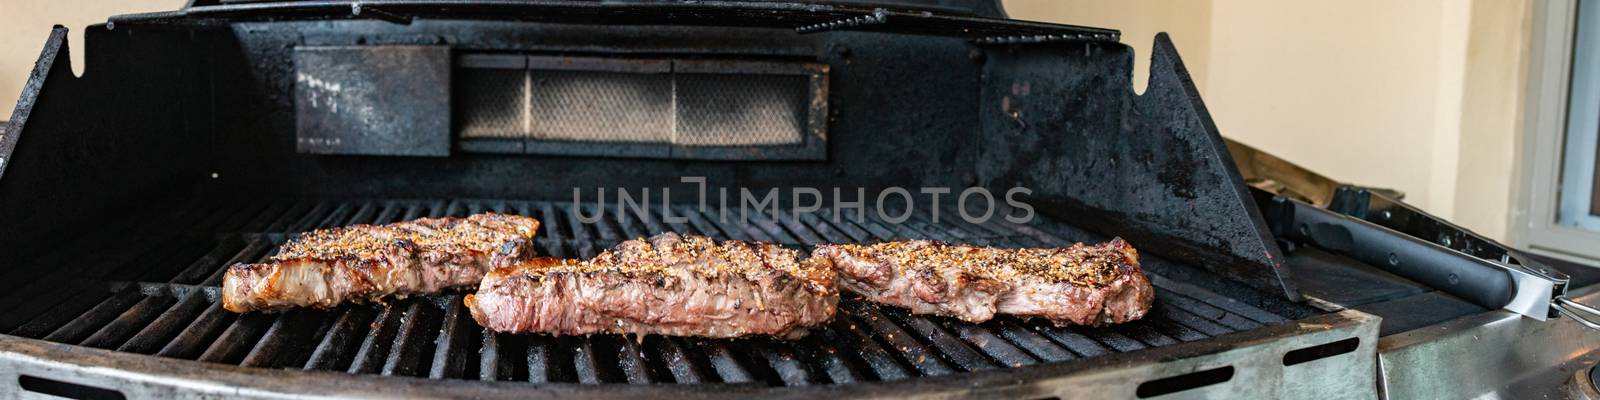 Steaks on the grill. A nice pair of juicy steaks on the grill with grill marks, flames and smoke.